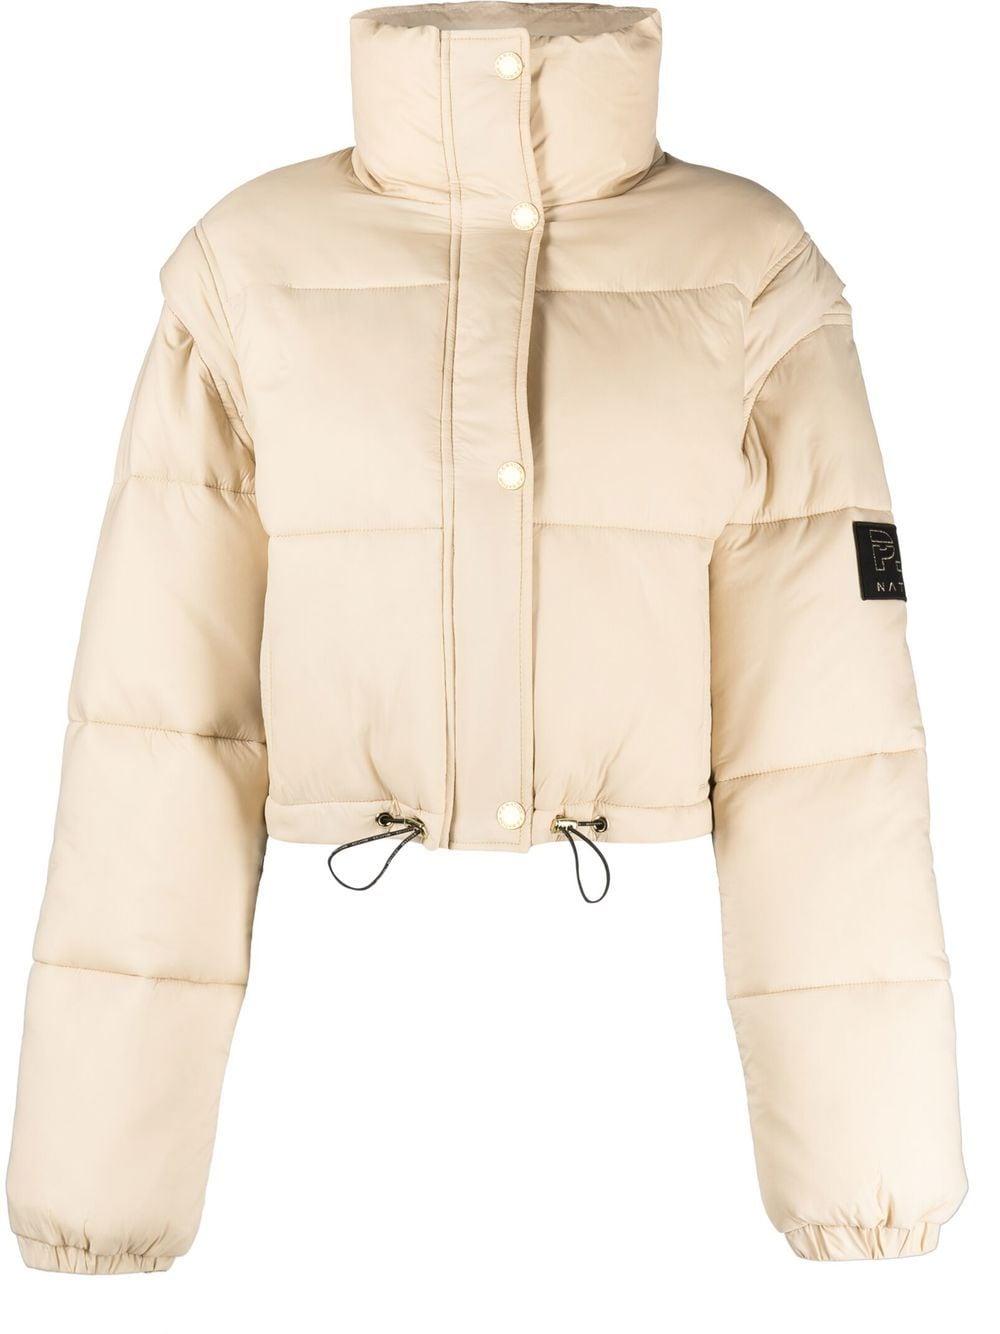 P.E Nation Represent Detachable-sleeve Puffer Jacket in Natural | Lyst